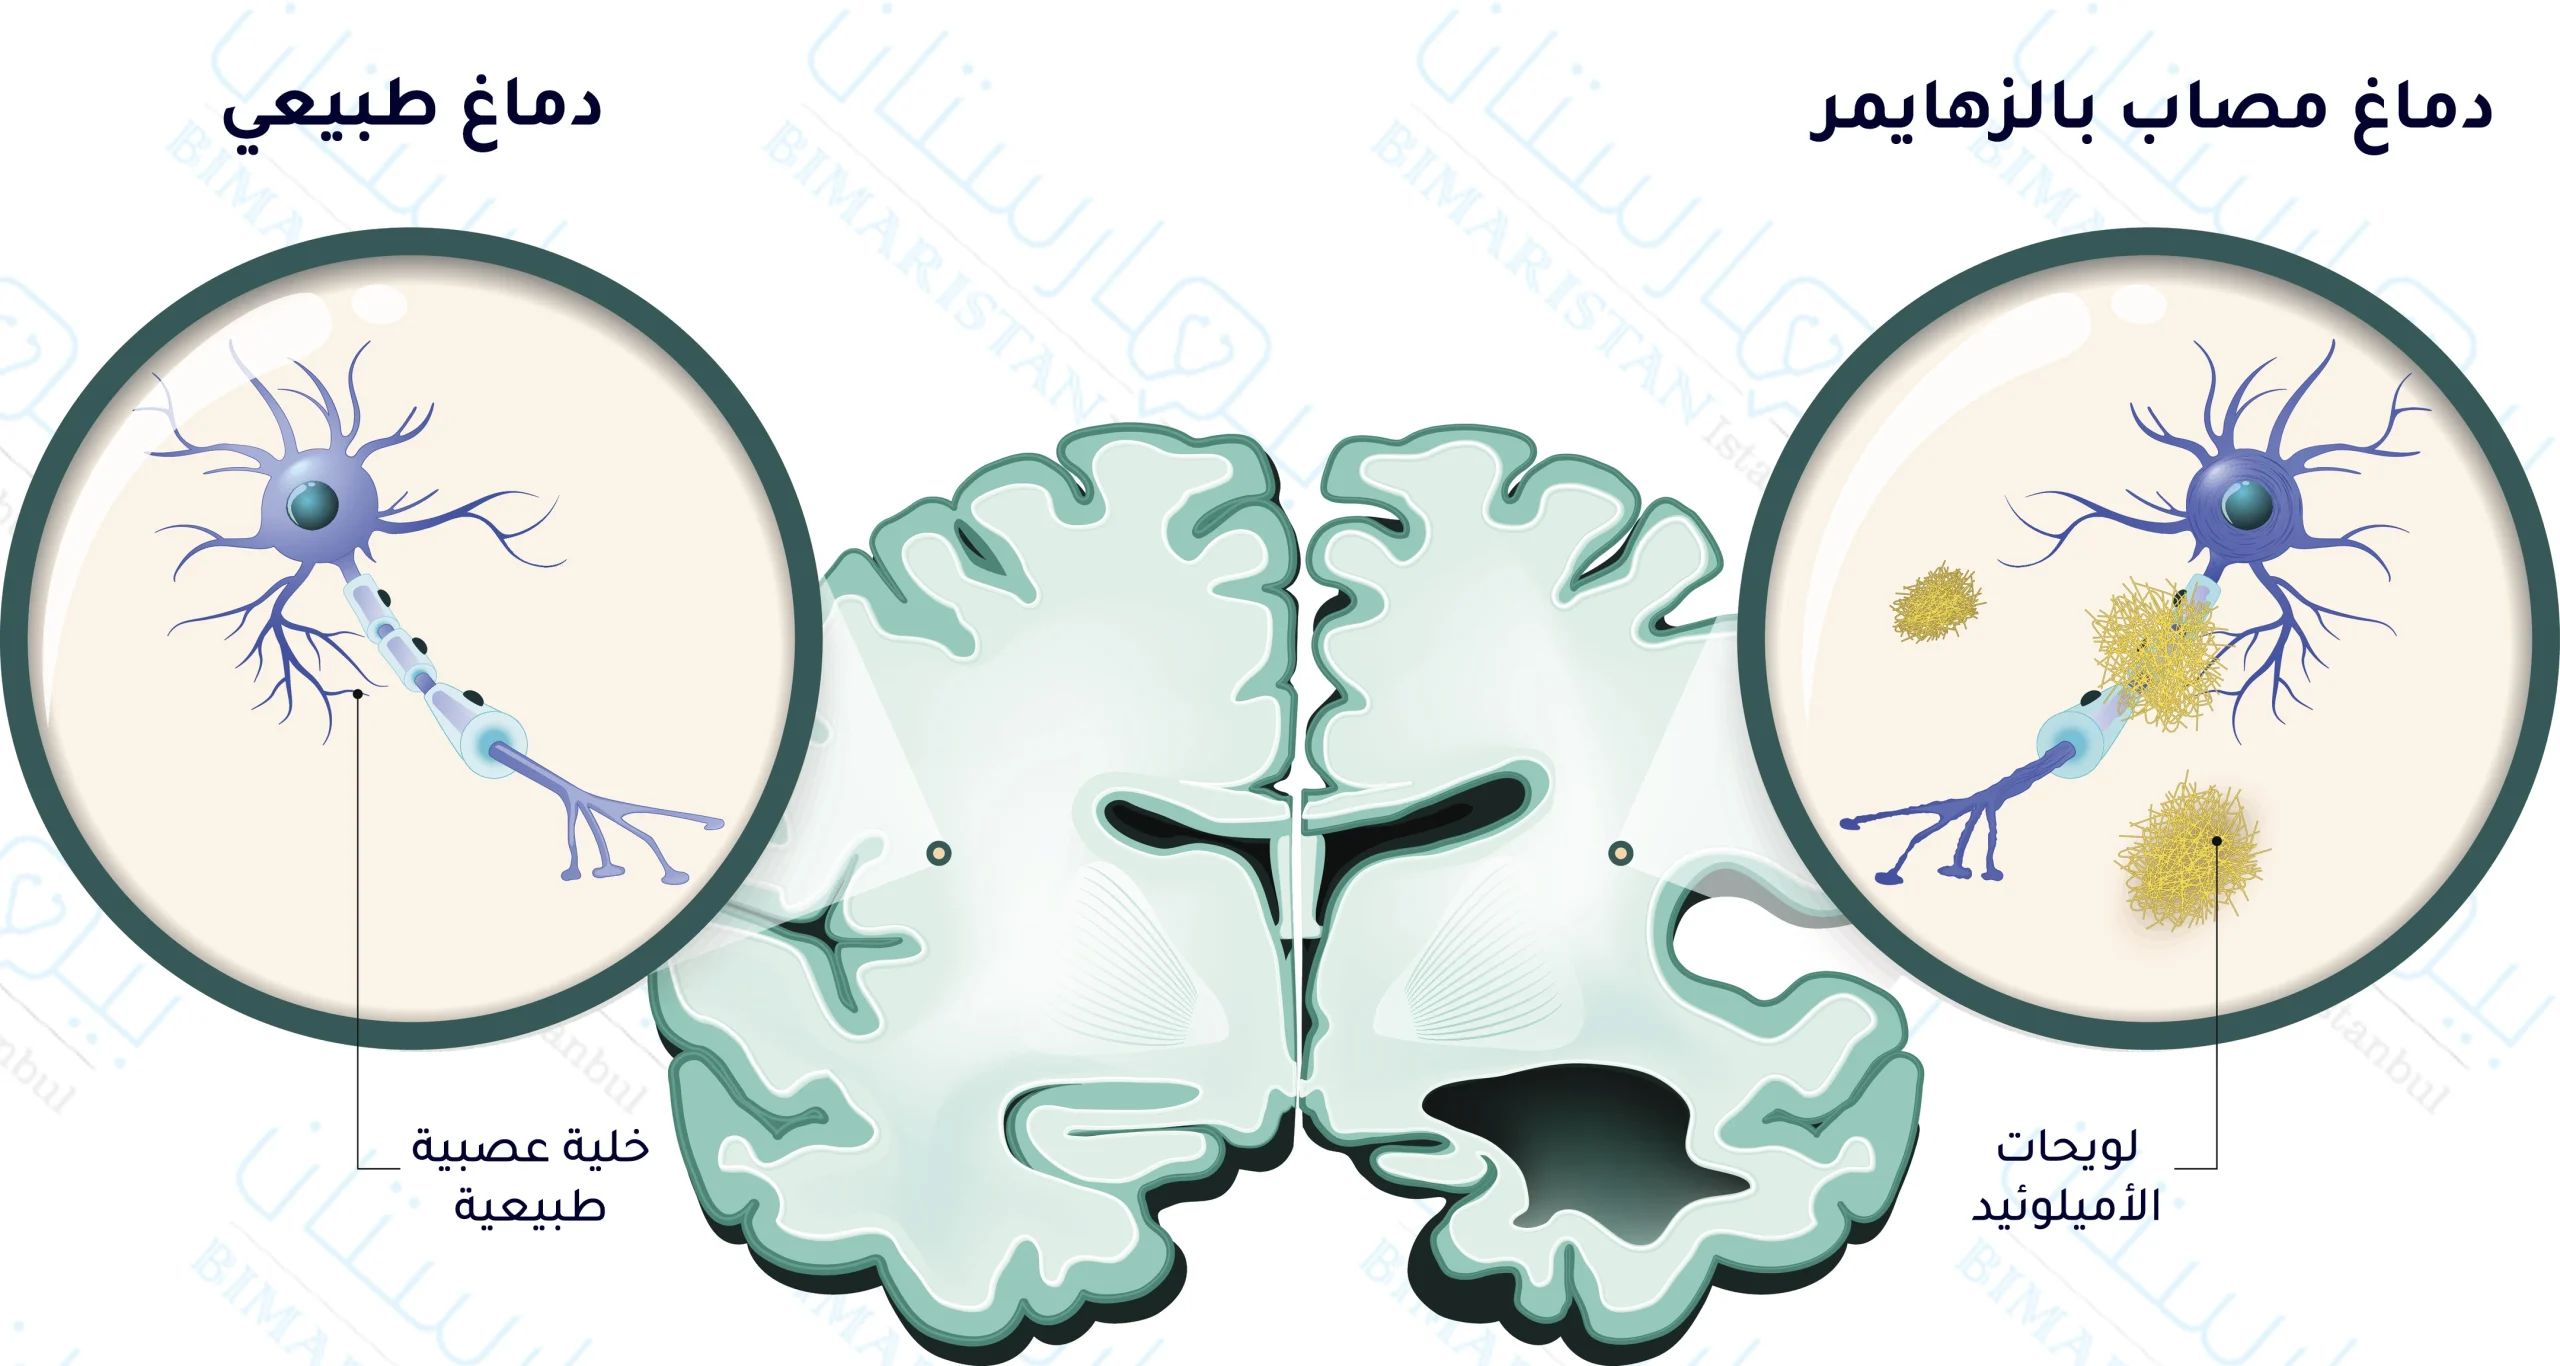 We observe the formation of amyloid plaques on nerve cells and the shrinkage of neuronal matter in the brain of a young man with early Alzheimer's.